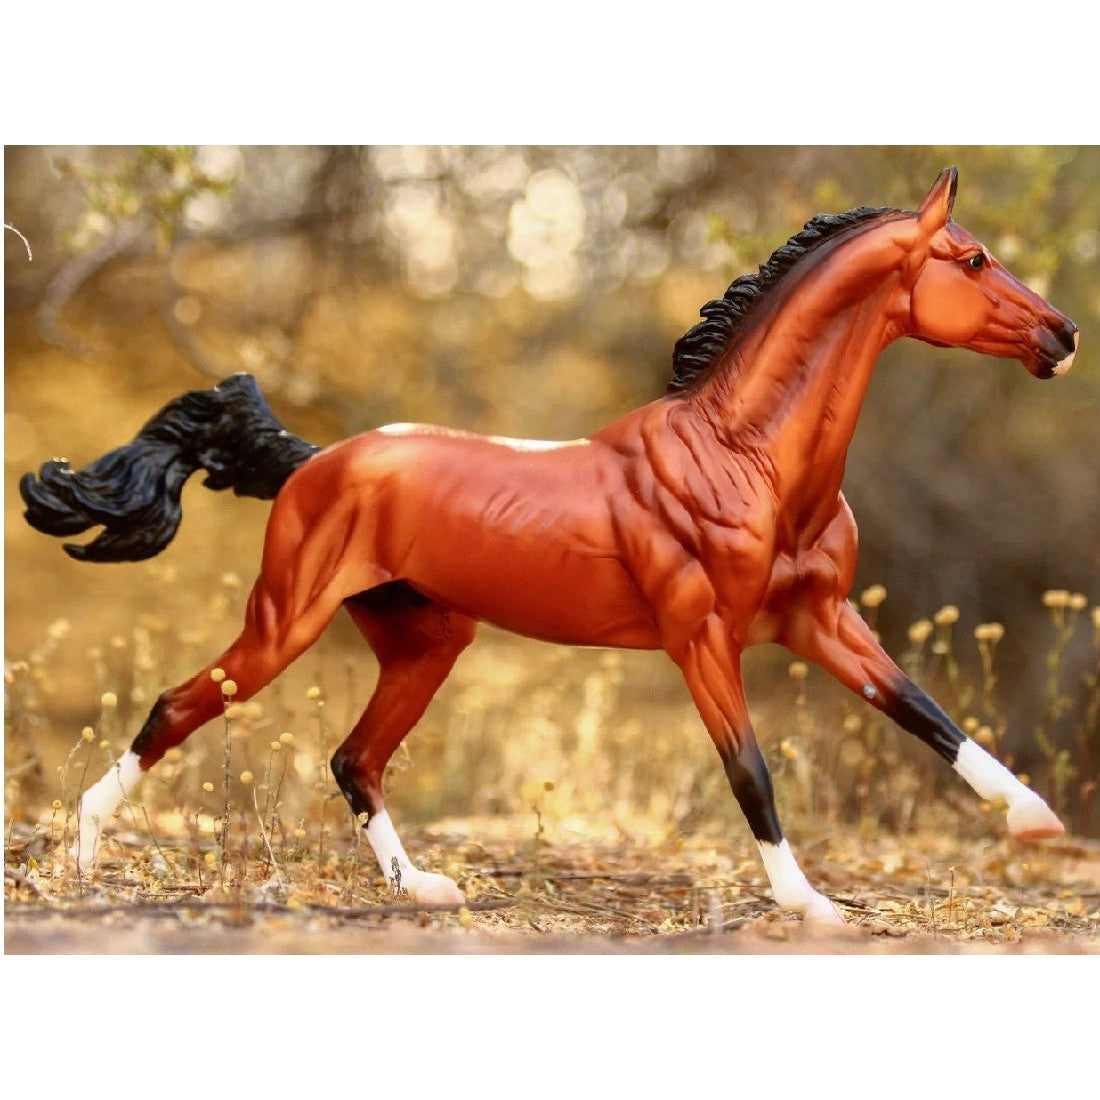 Breyer Horse Toys plastic model posing dynamically in natural background.